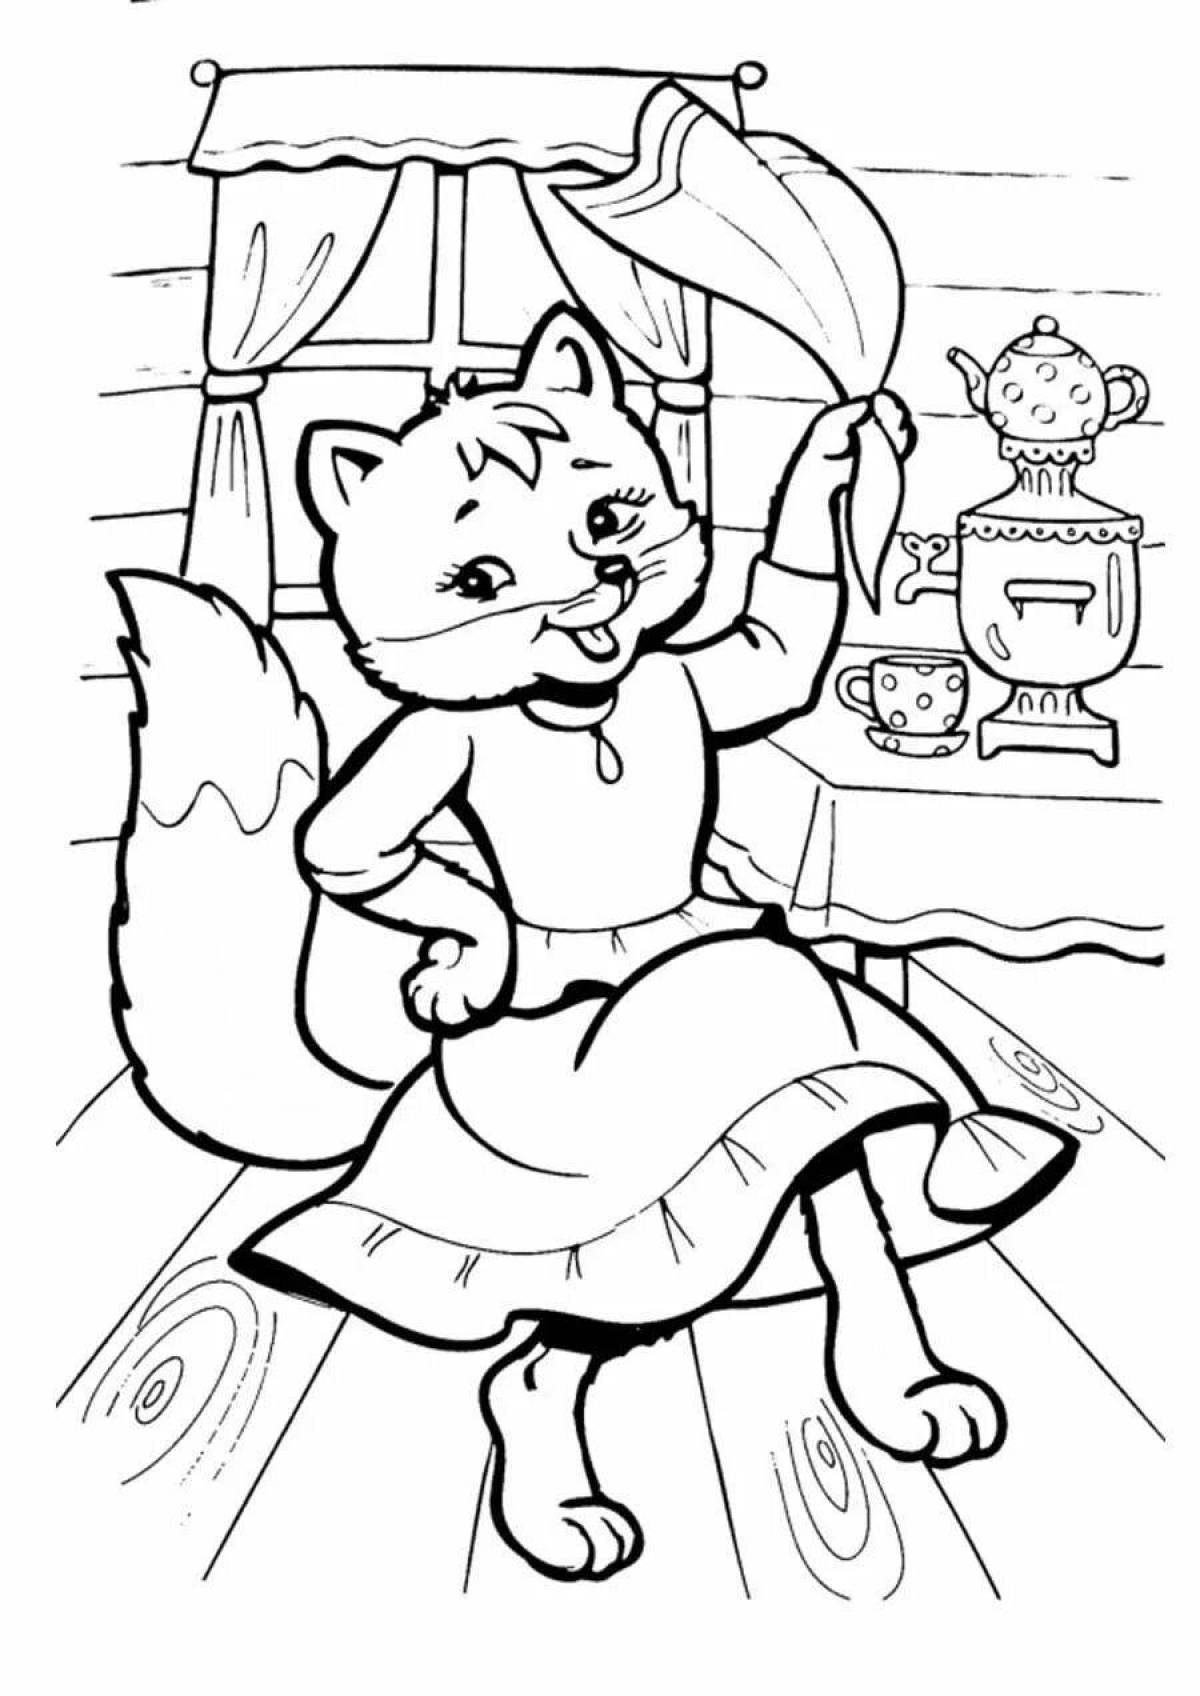 Coloring book playful hare's hut